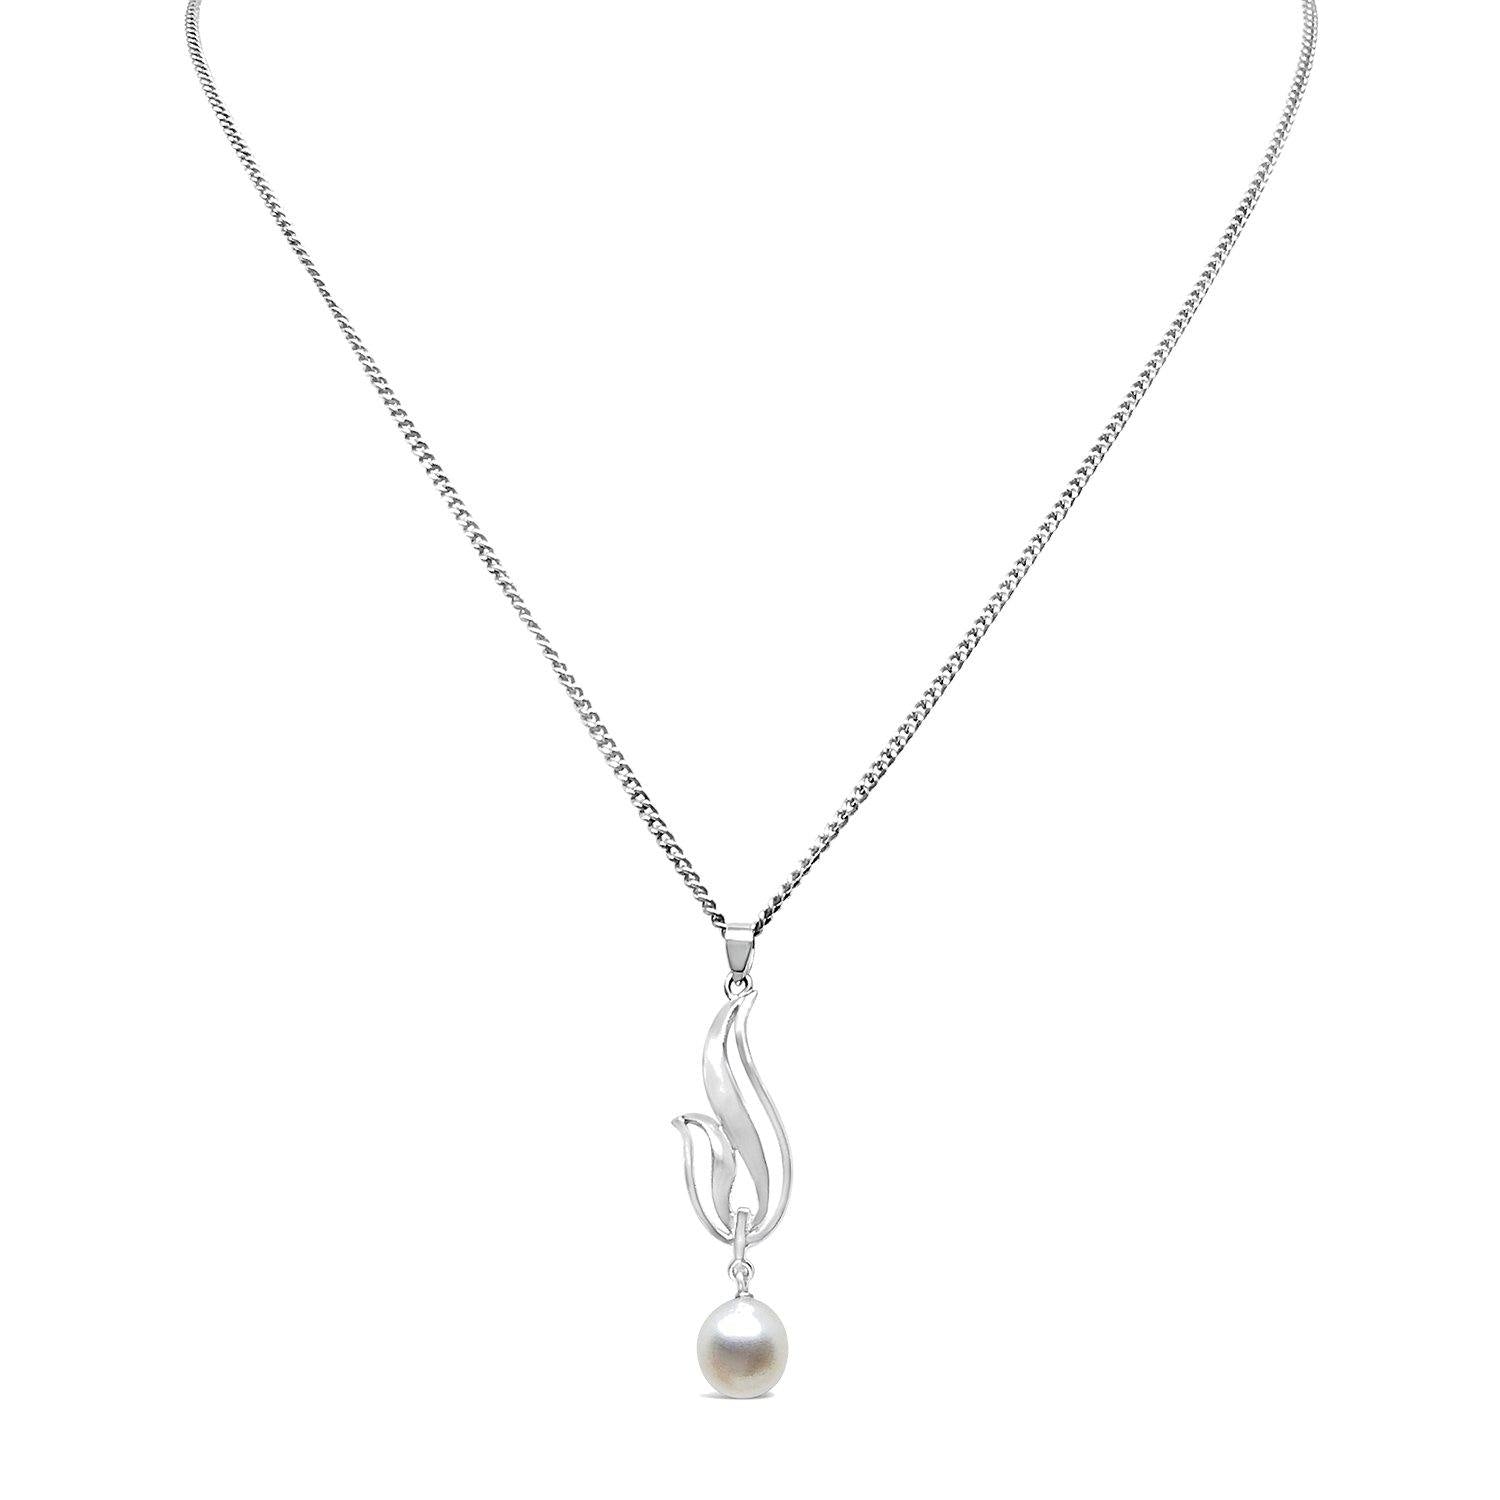 Swirl Mikimoto Saltwater Akoya Cultured Pearl Necklace Designer- Sterling Silver